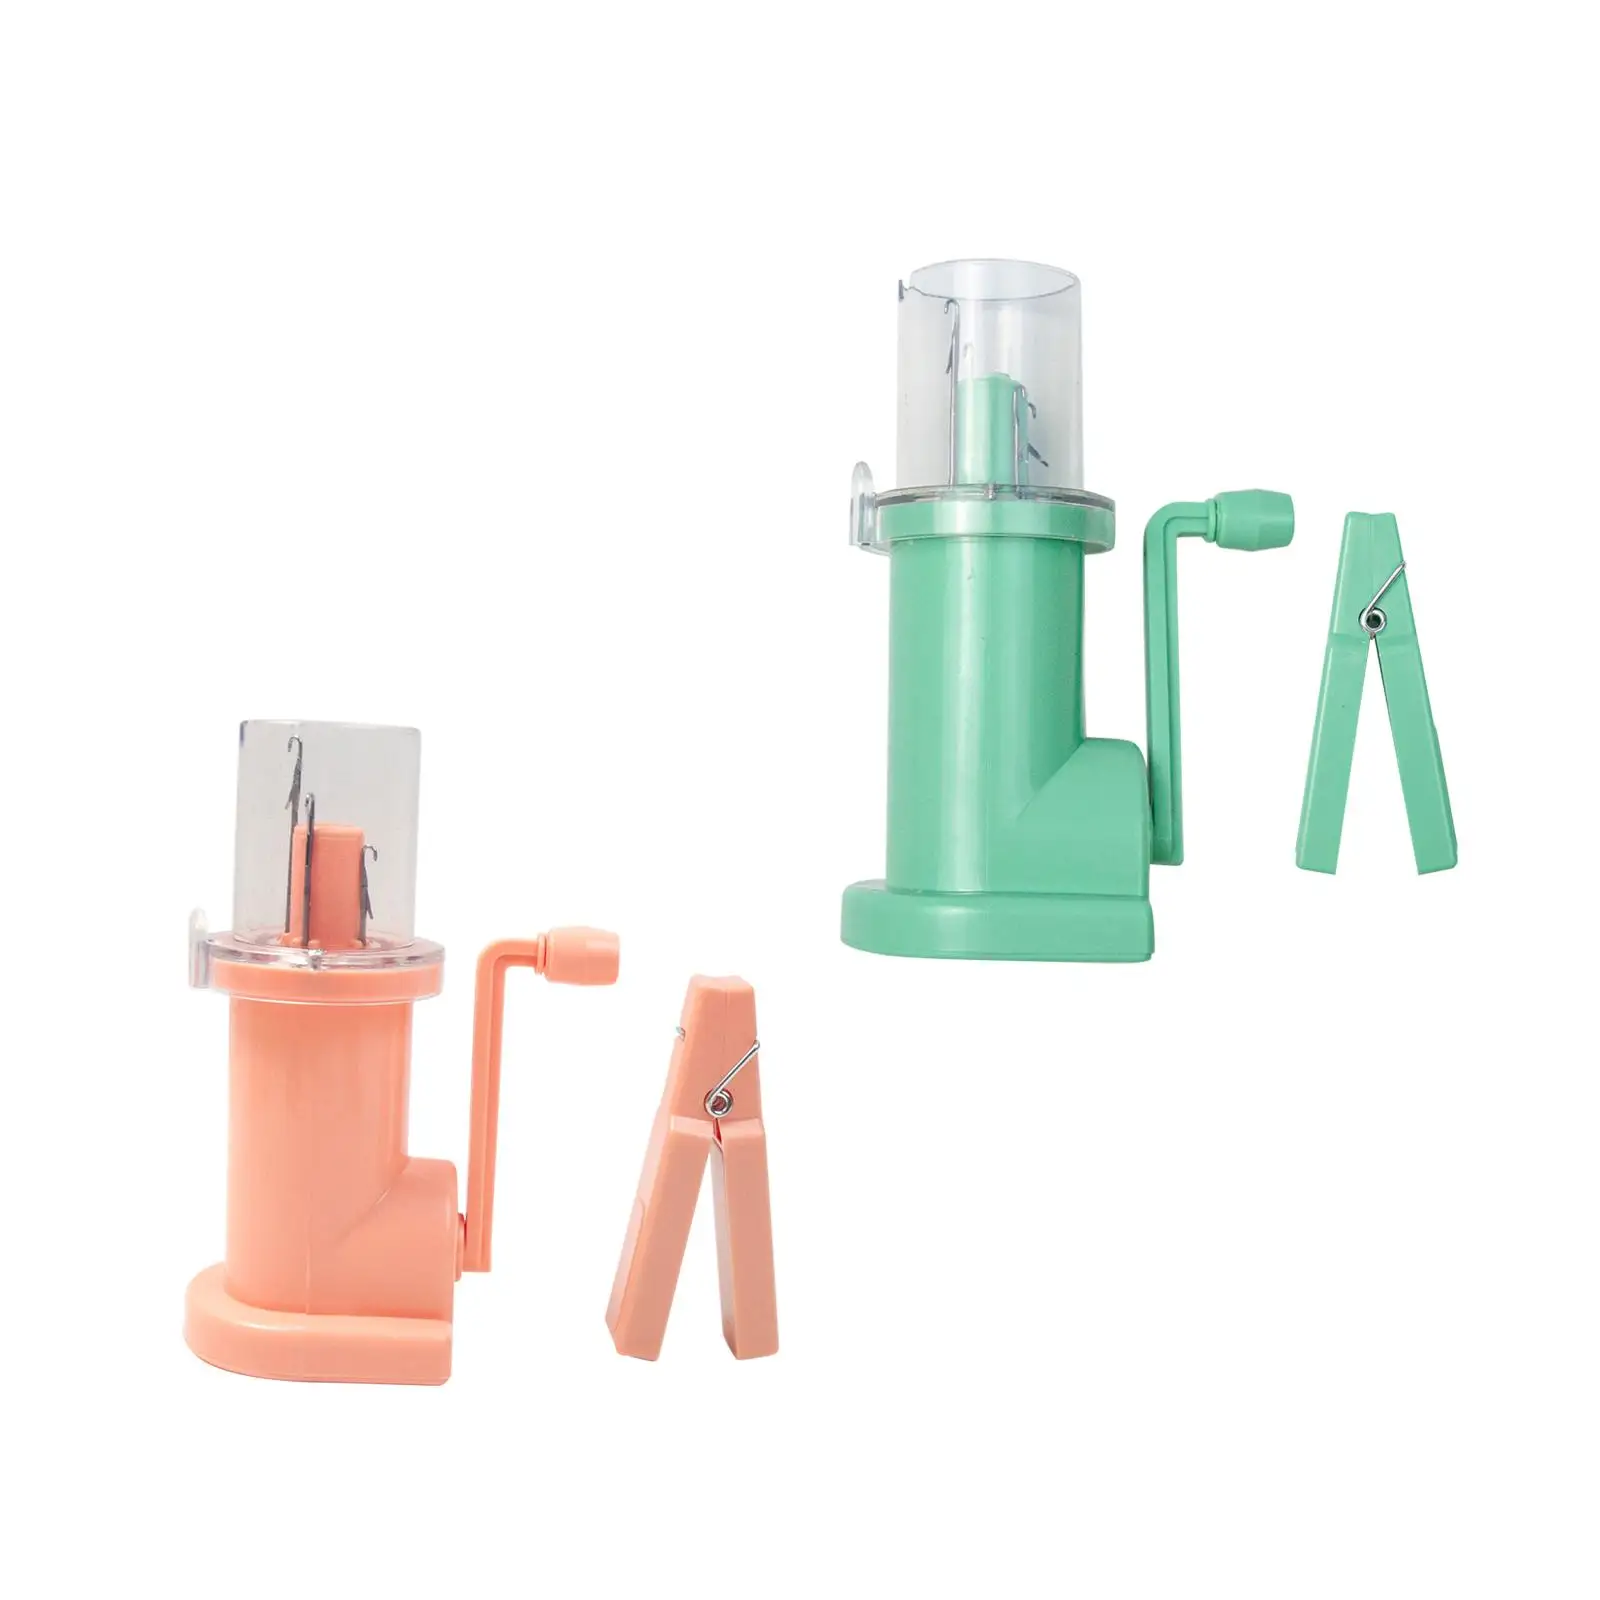 Mini Hand Operated Embellishment Winding Tool Sturdy Auxiliary Tool Portable Braiding Thread Device for Making DIY Crafts